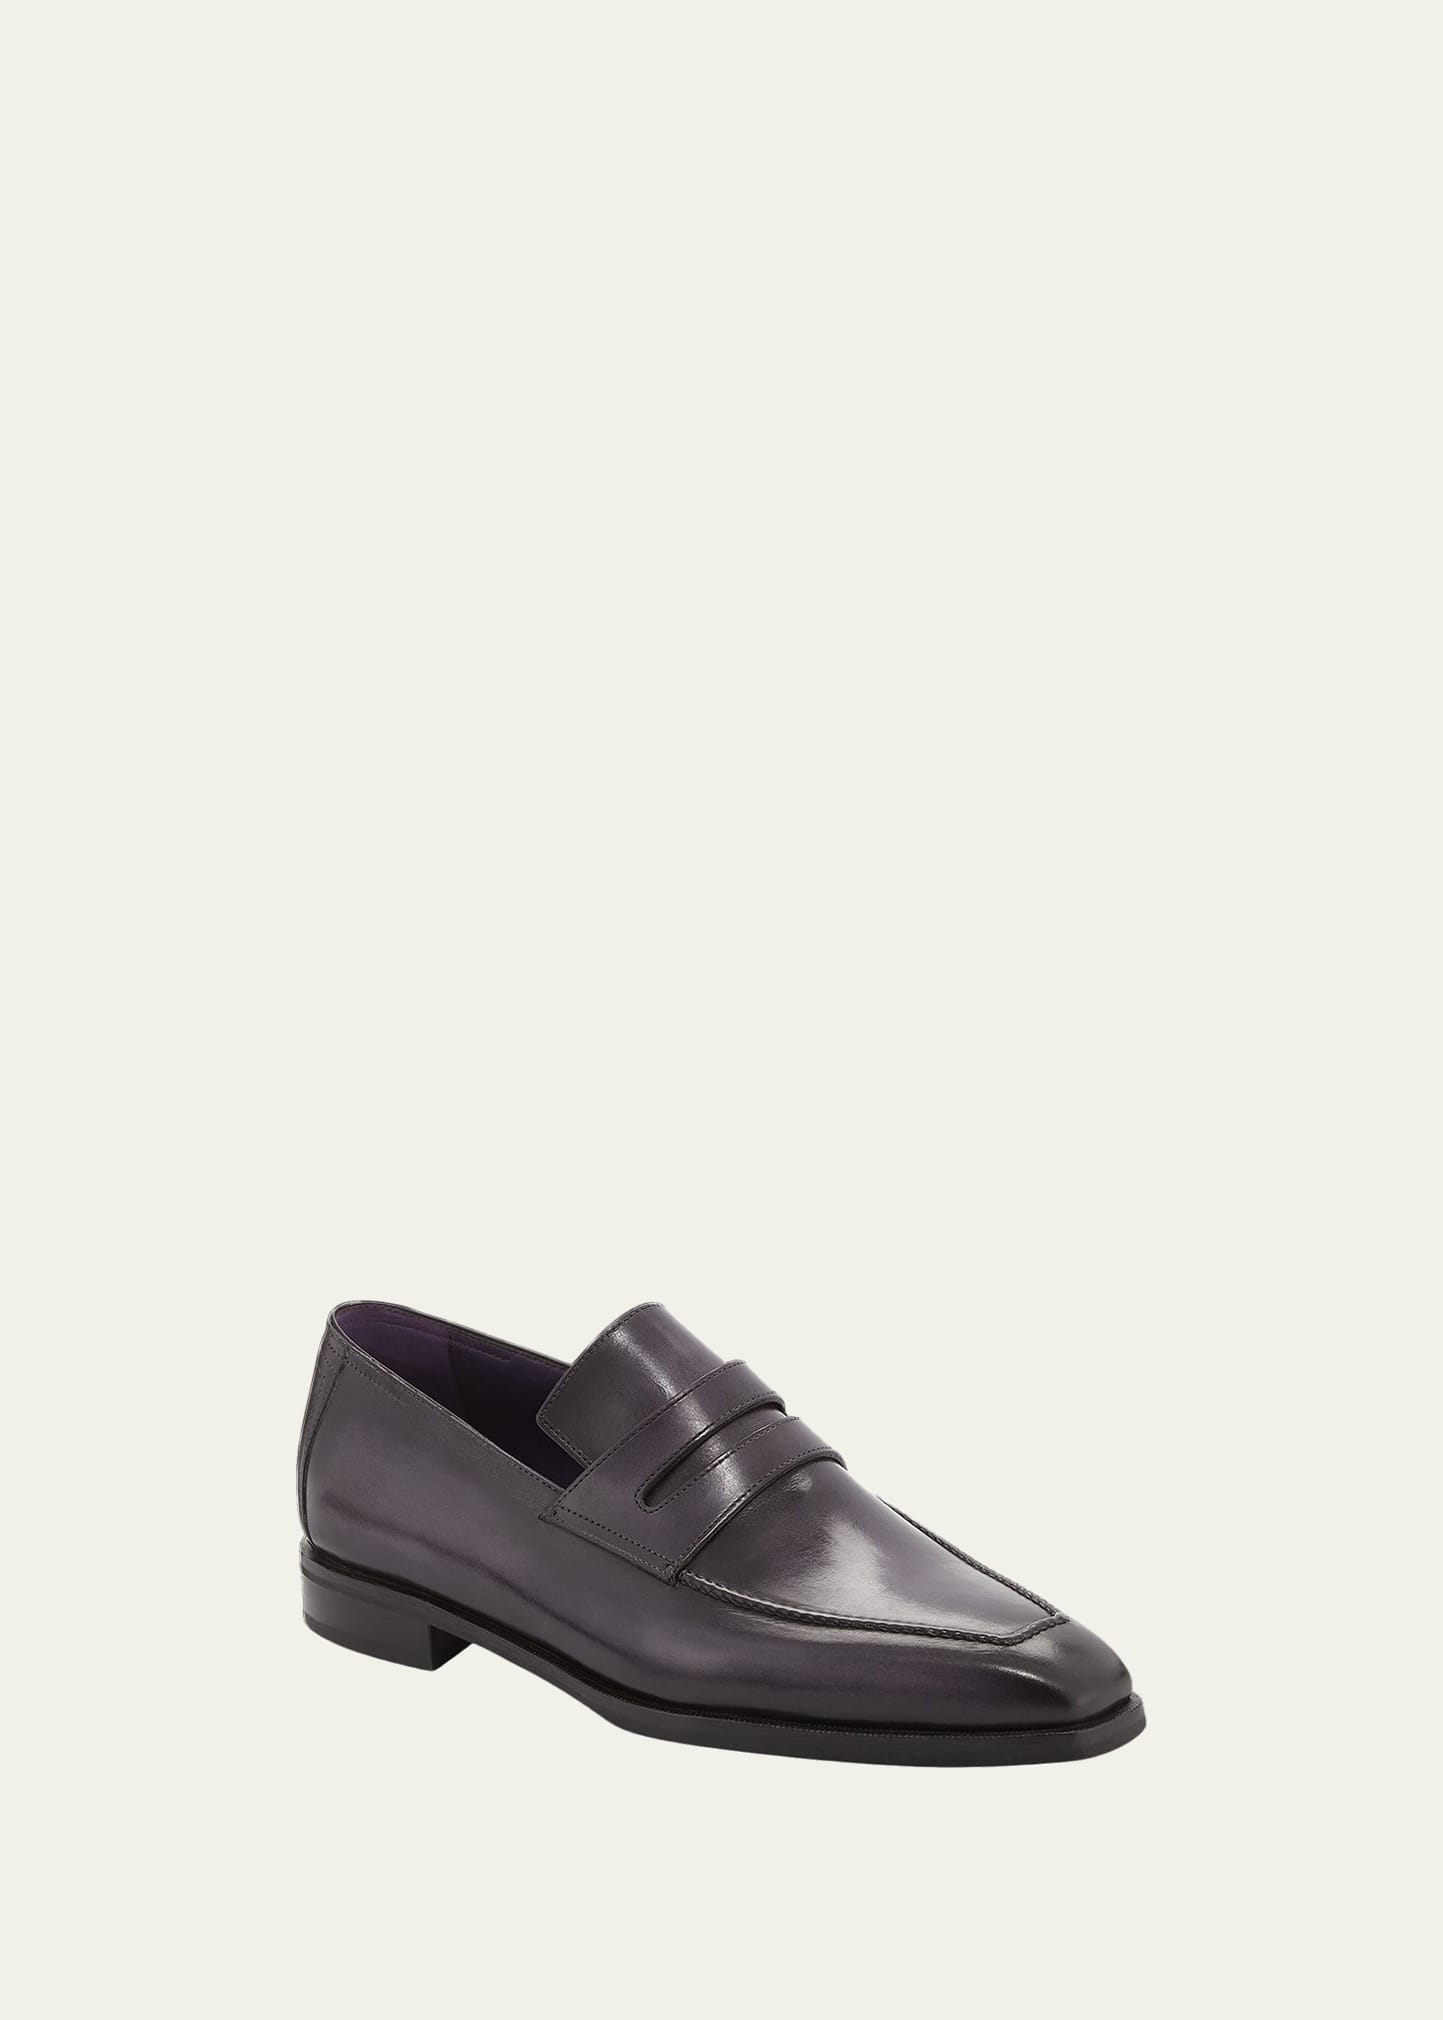 Berluti Andy Leather Loafer, Black